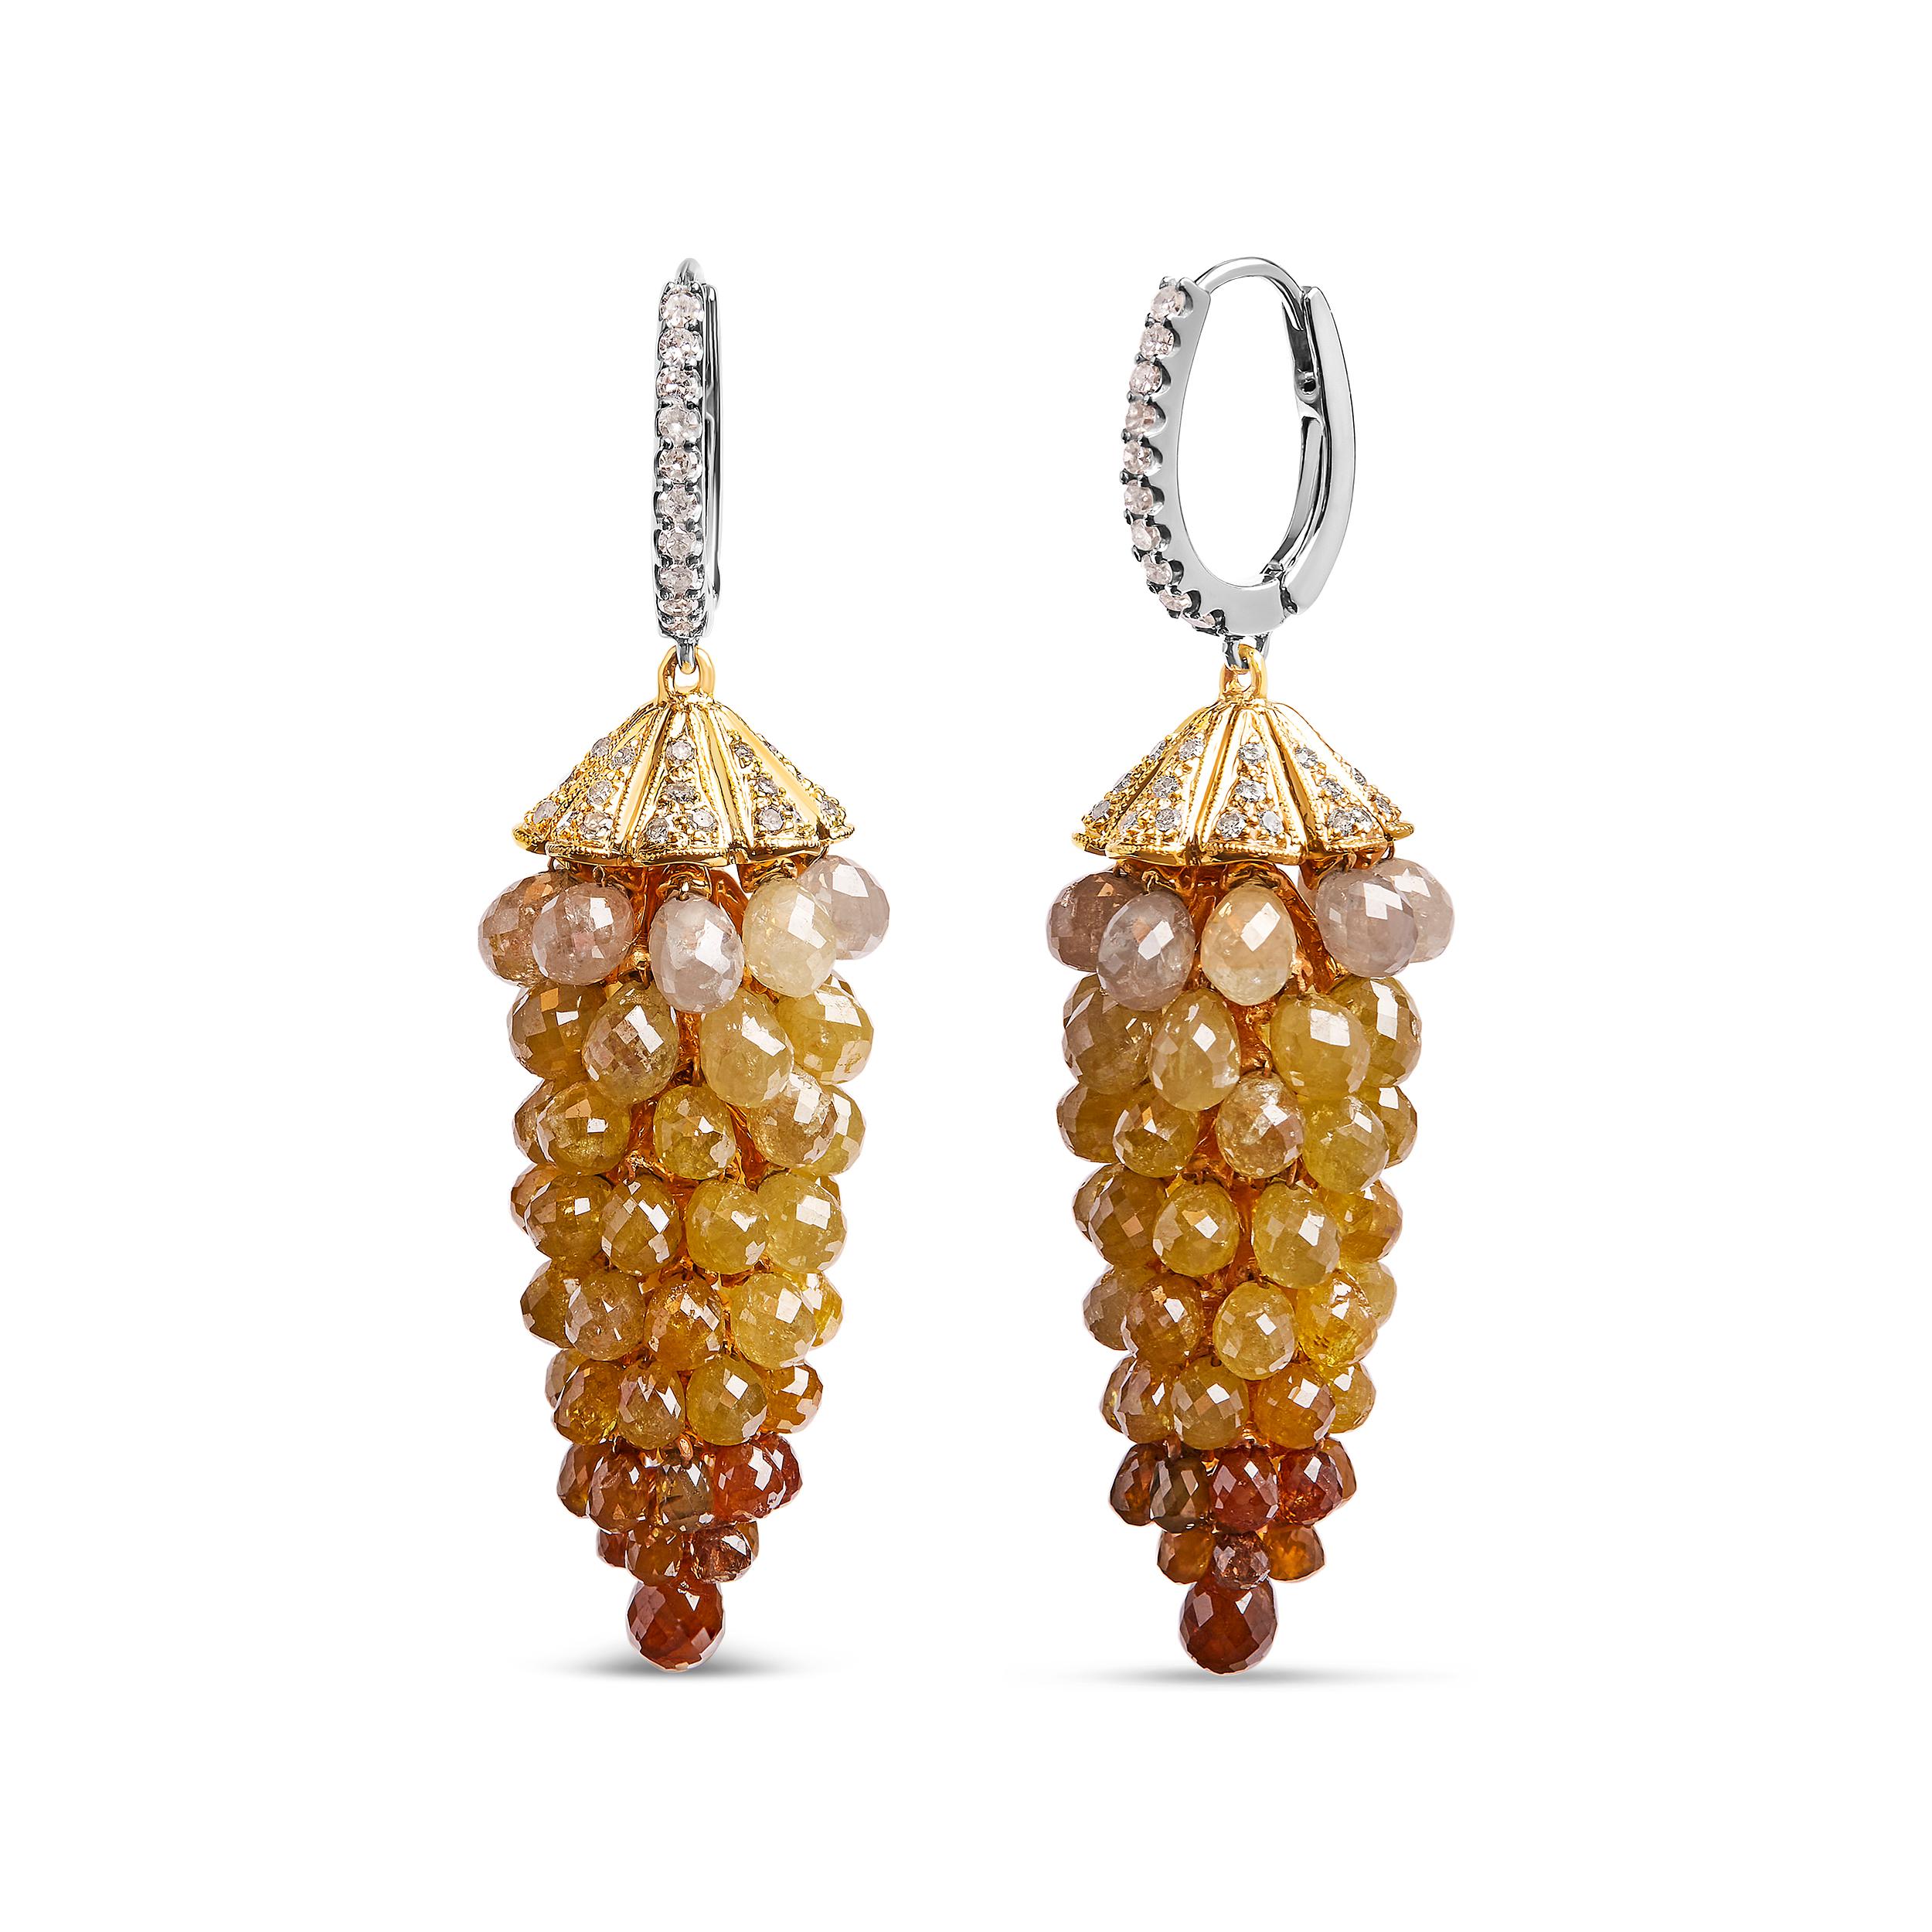 Introducing a mesmerizing masterpiece that exudes elegance and sophistication. These 14K White and Yellow Gold Honeycomb Drop and Dangle Earrings are adorned with a dazzling array of 208 diamonds, totaling an astonishing 38 carats. Each diamond,